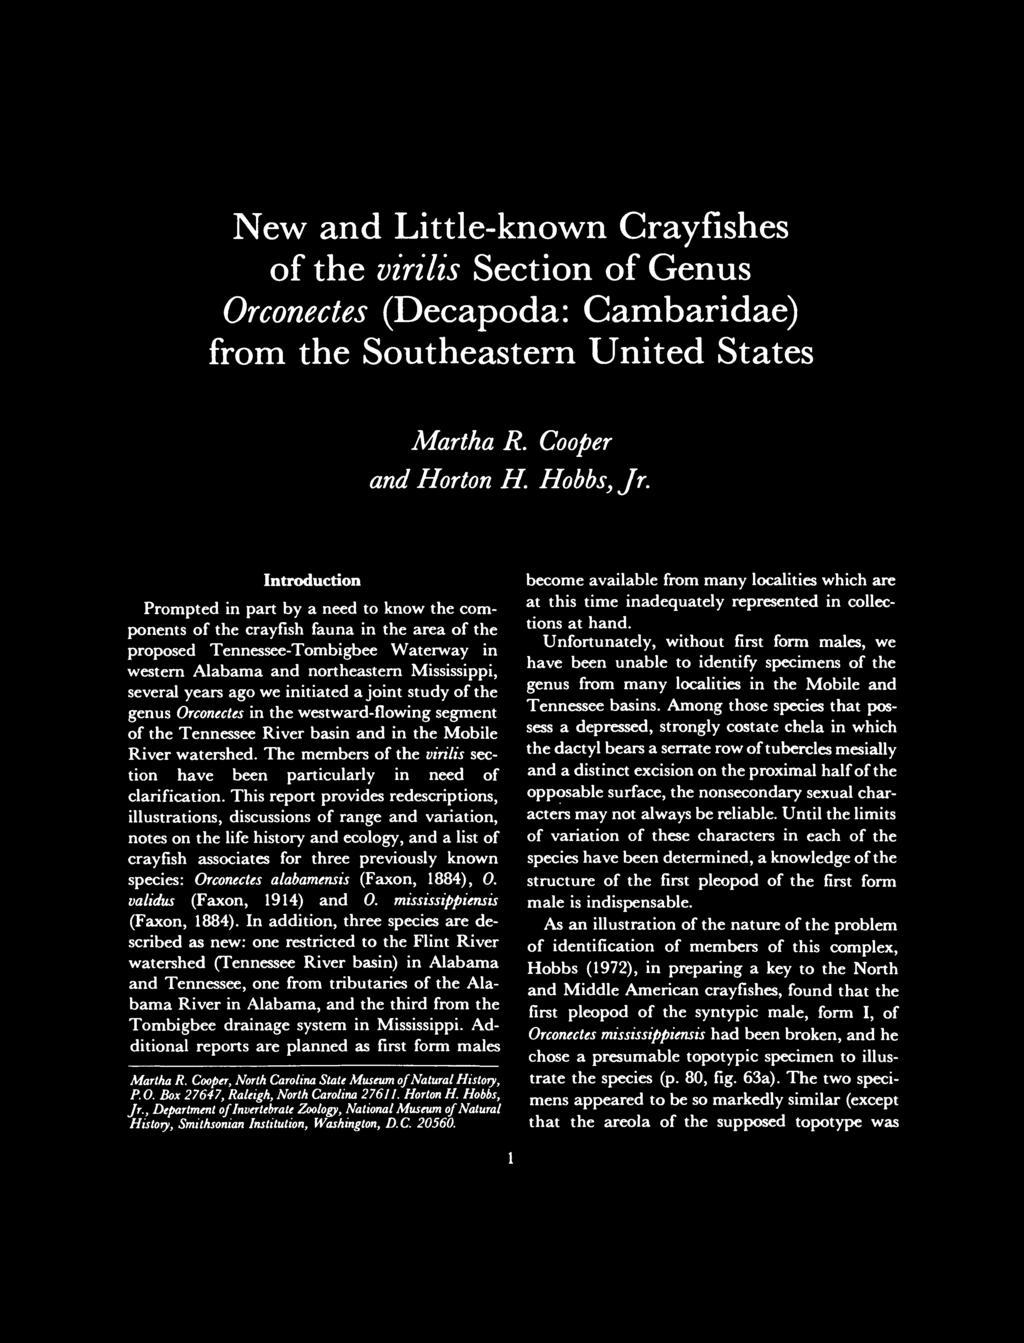 New and Little-known Crayfishes of the virilis Section of Genus Orconectes (Decapoda: Cambaridae) from the Southeastern United States Martha R. Cooper and Horton H. Hobbs, Jr.